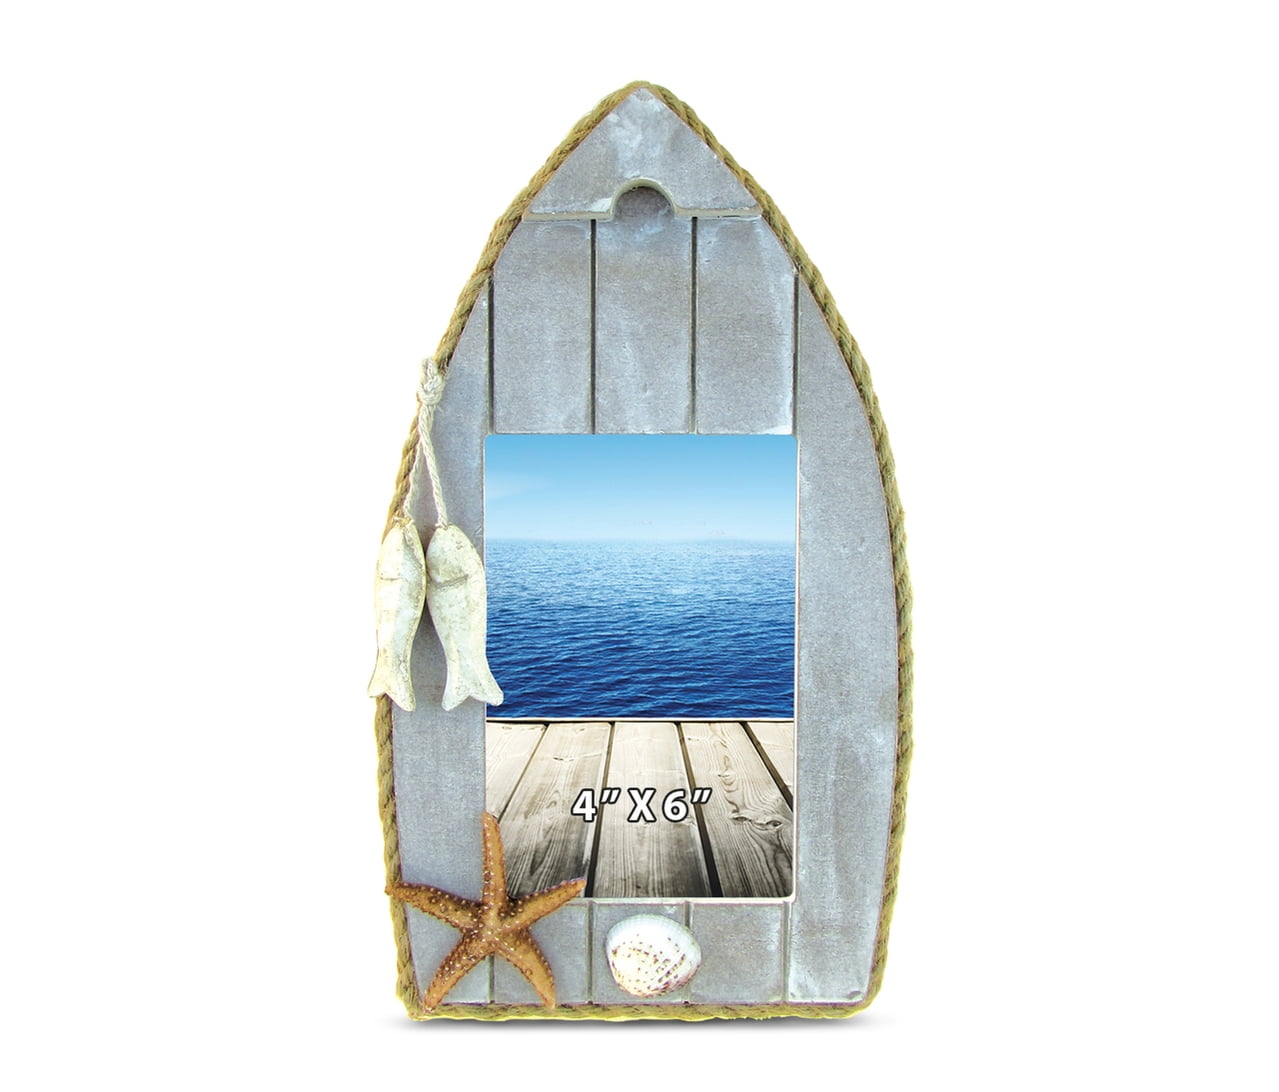 3D Sail Boat Decoration Rustic Finish Handcrafted For Tabletops Office Family Desktop Accent Accessory Puzzled Relax 3.5 x 5 Distressed Wooden Beach Picture Frame Nautical Coastal Themed Home Decor